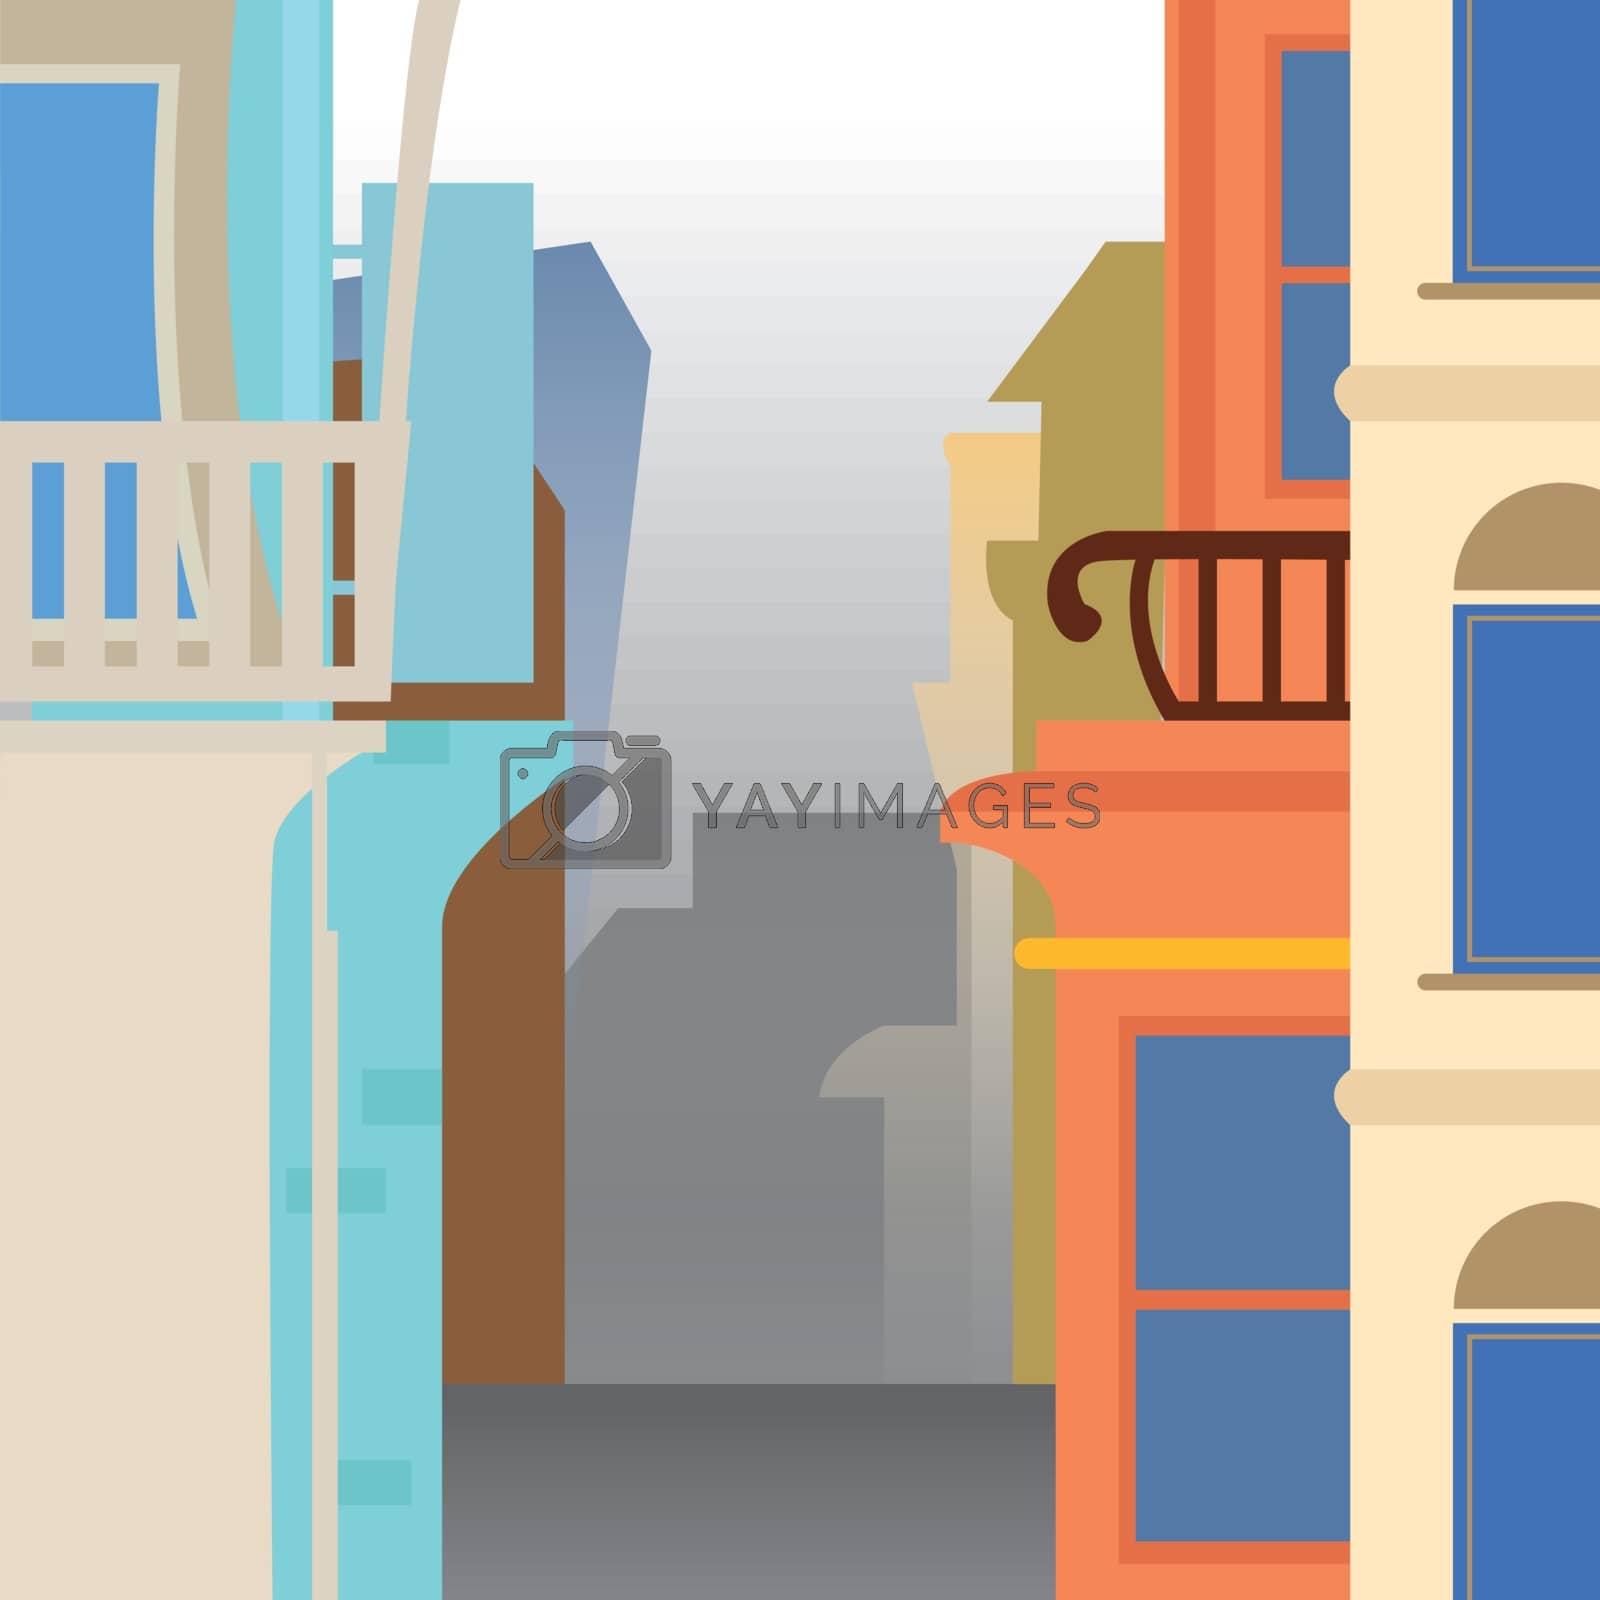 Royalty free image of city buildings by glossygirl21